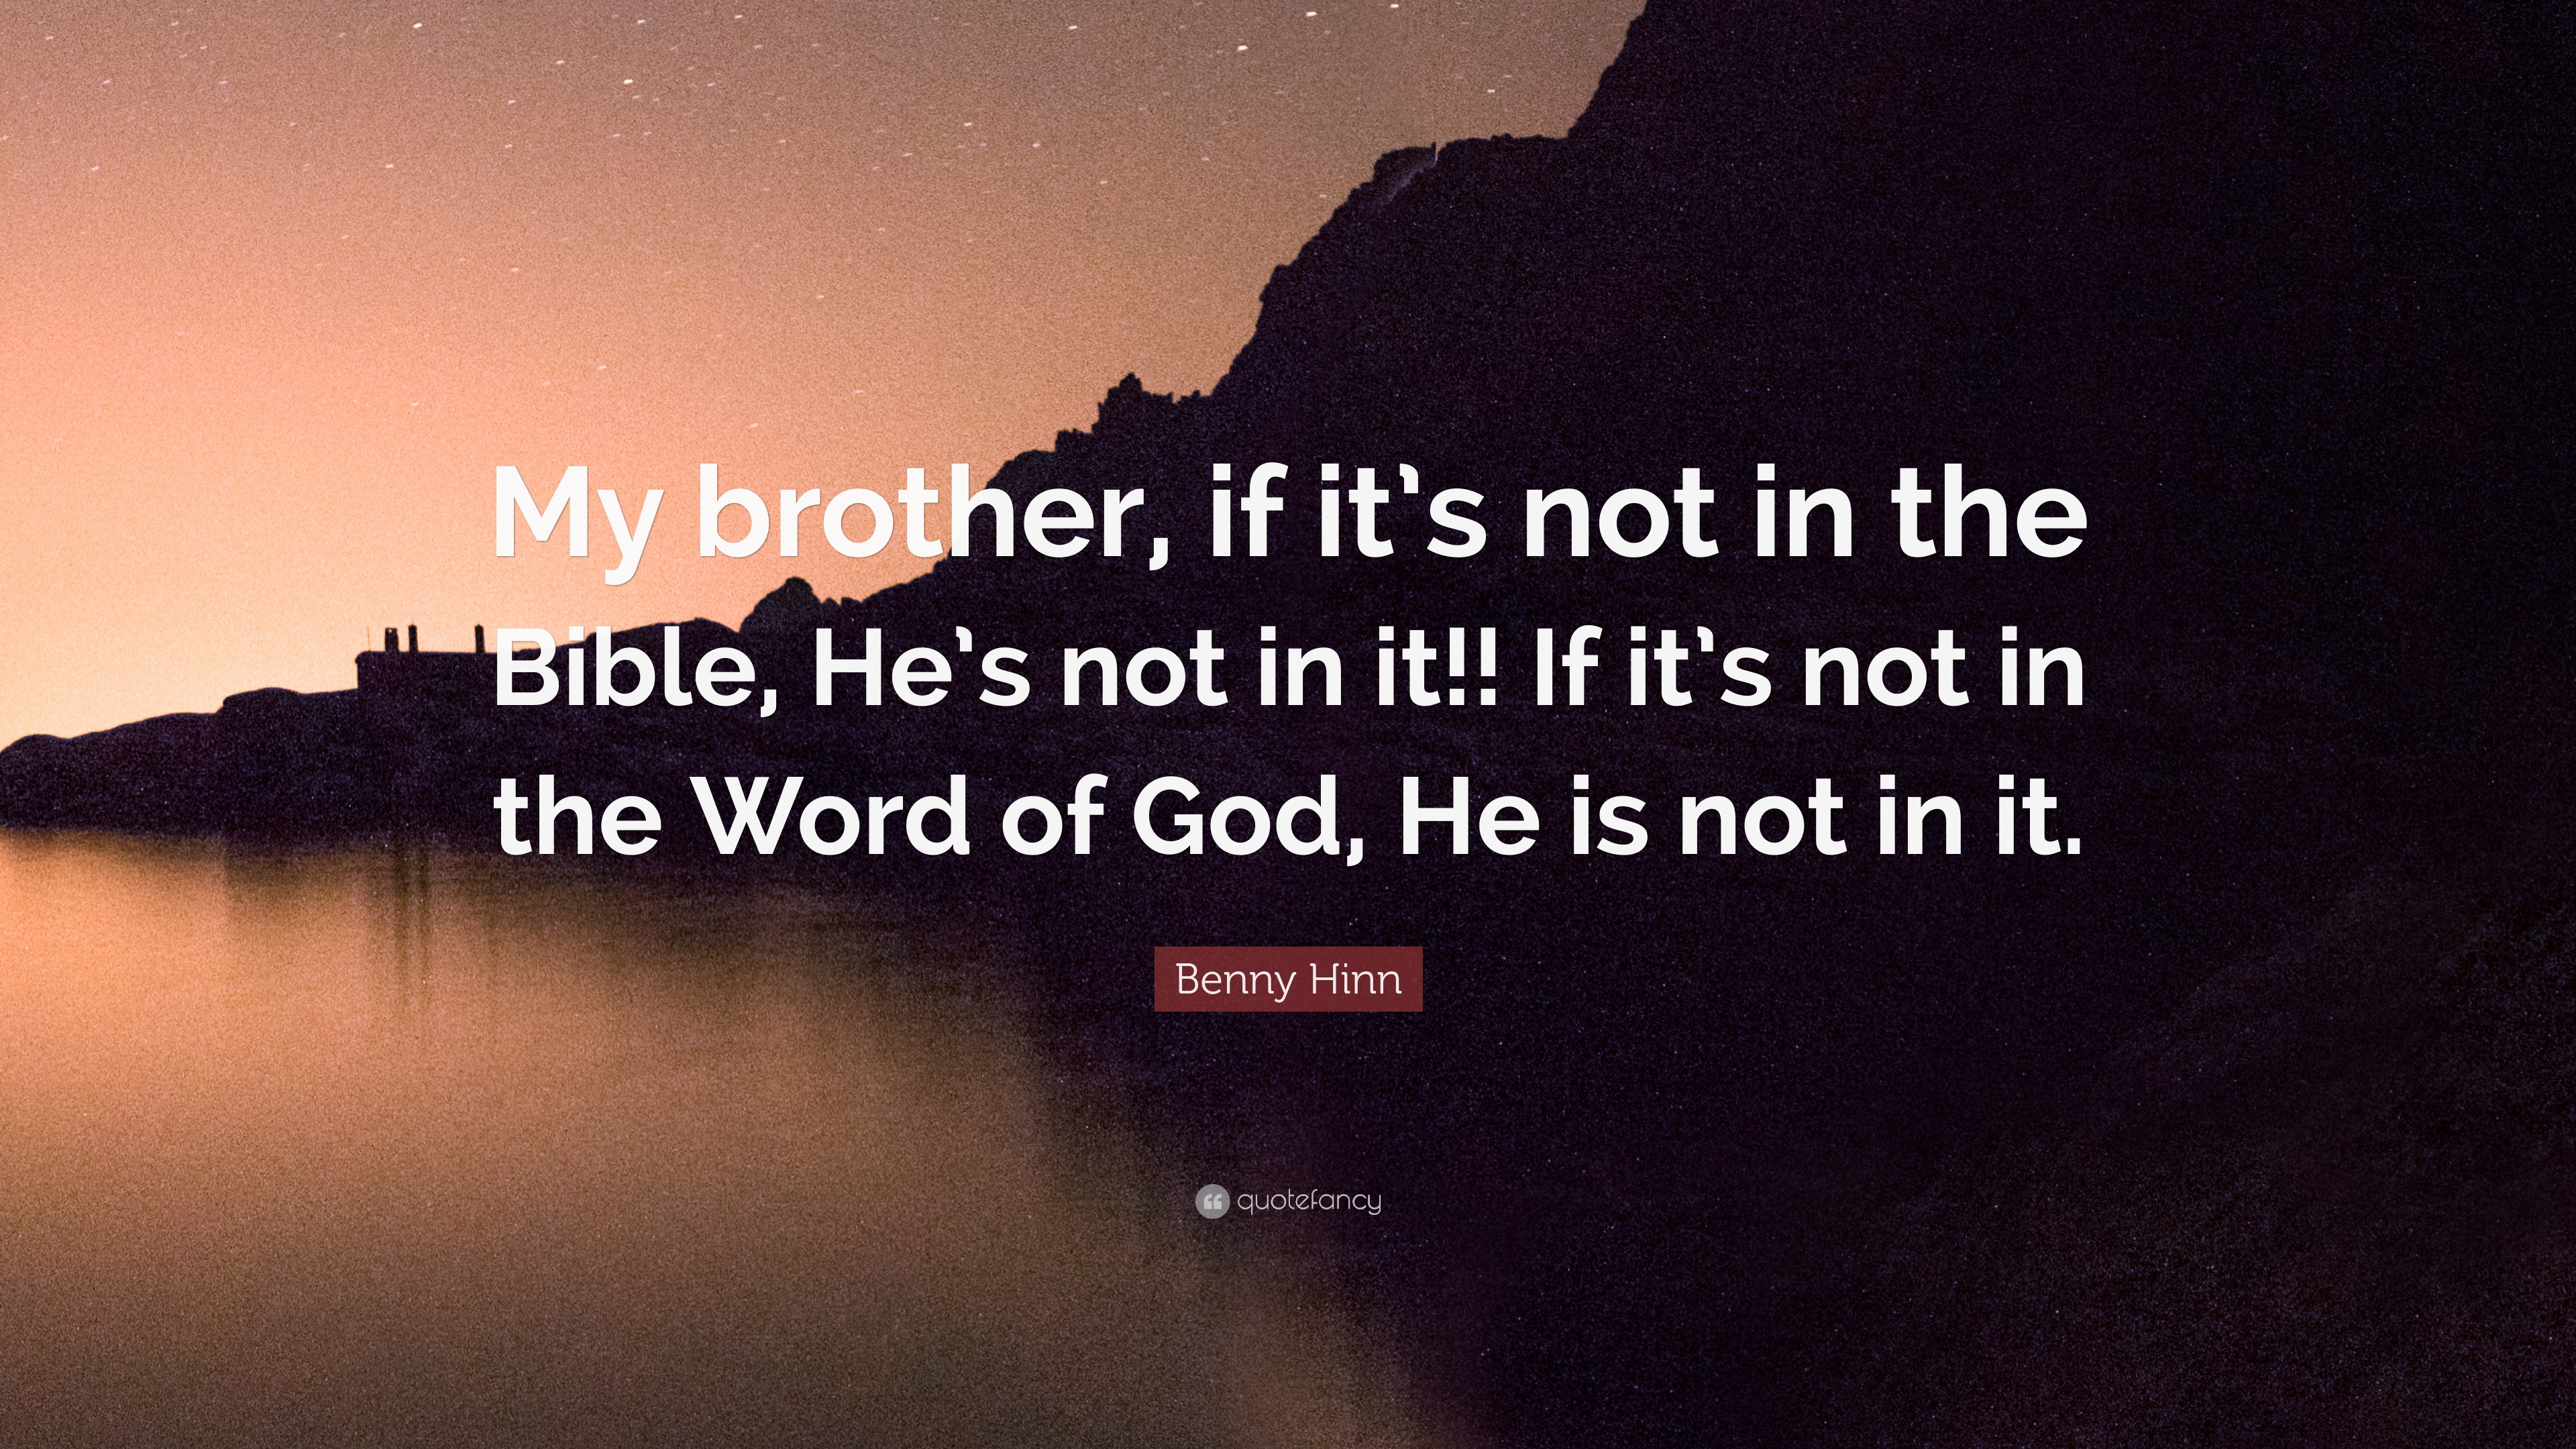 Benny Hinn Quote: “My brother, if it's not in the Bible, He's not in it!!